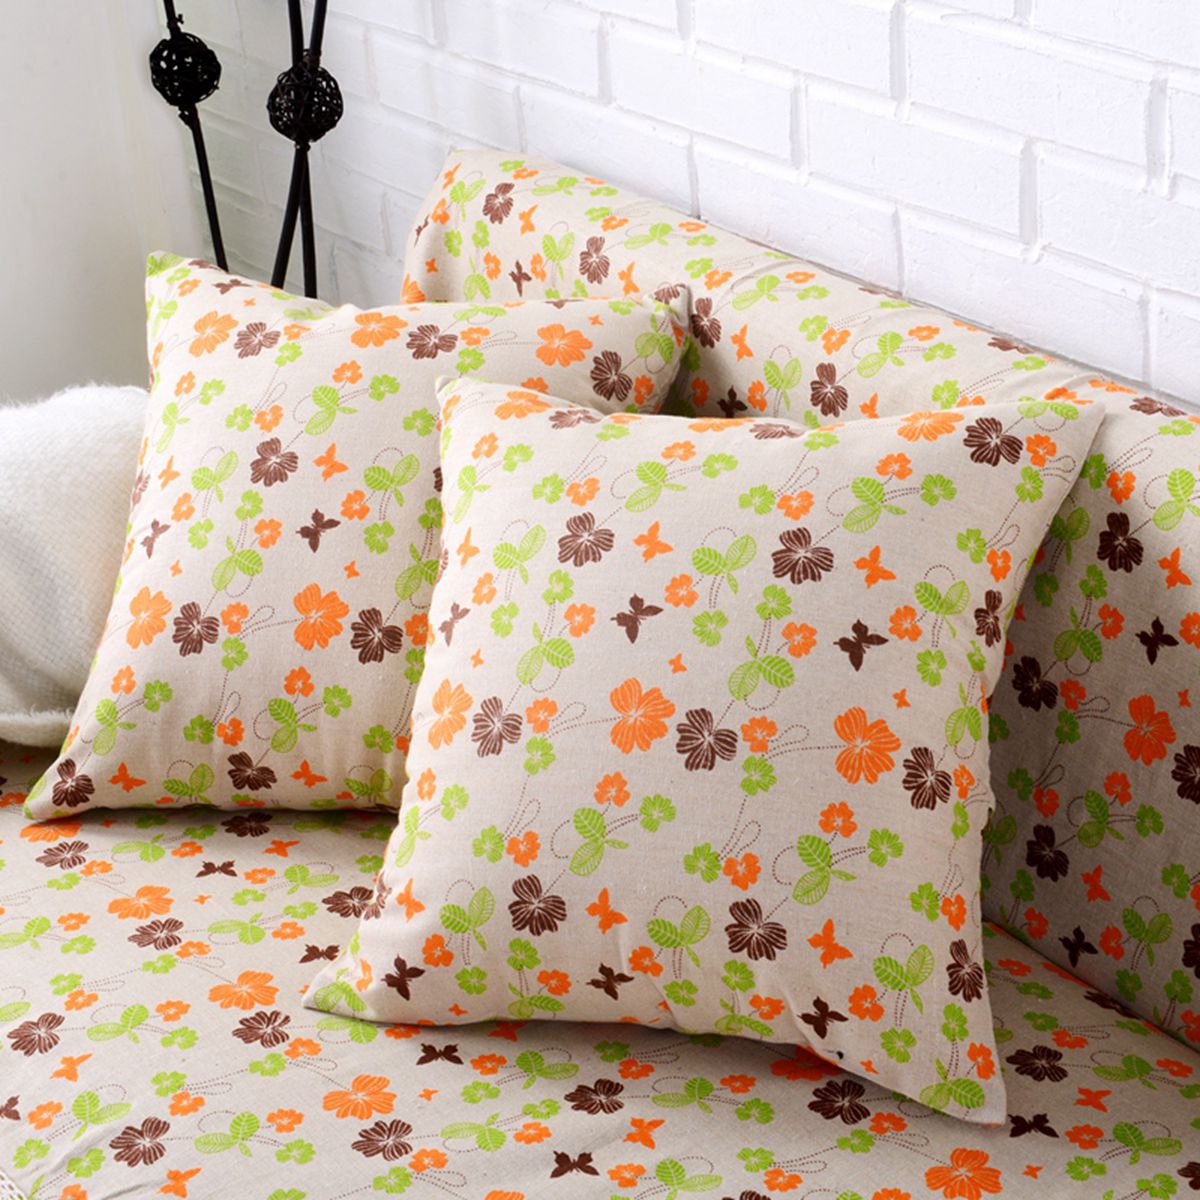 Sofa-Cover-Couch-Slipcover-Cotton-Blend-1-4-Seater-Sofa-Protector-Chair-Covers-Pet-Dog-1499498-7